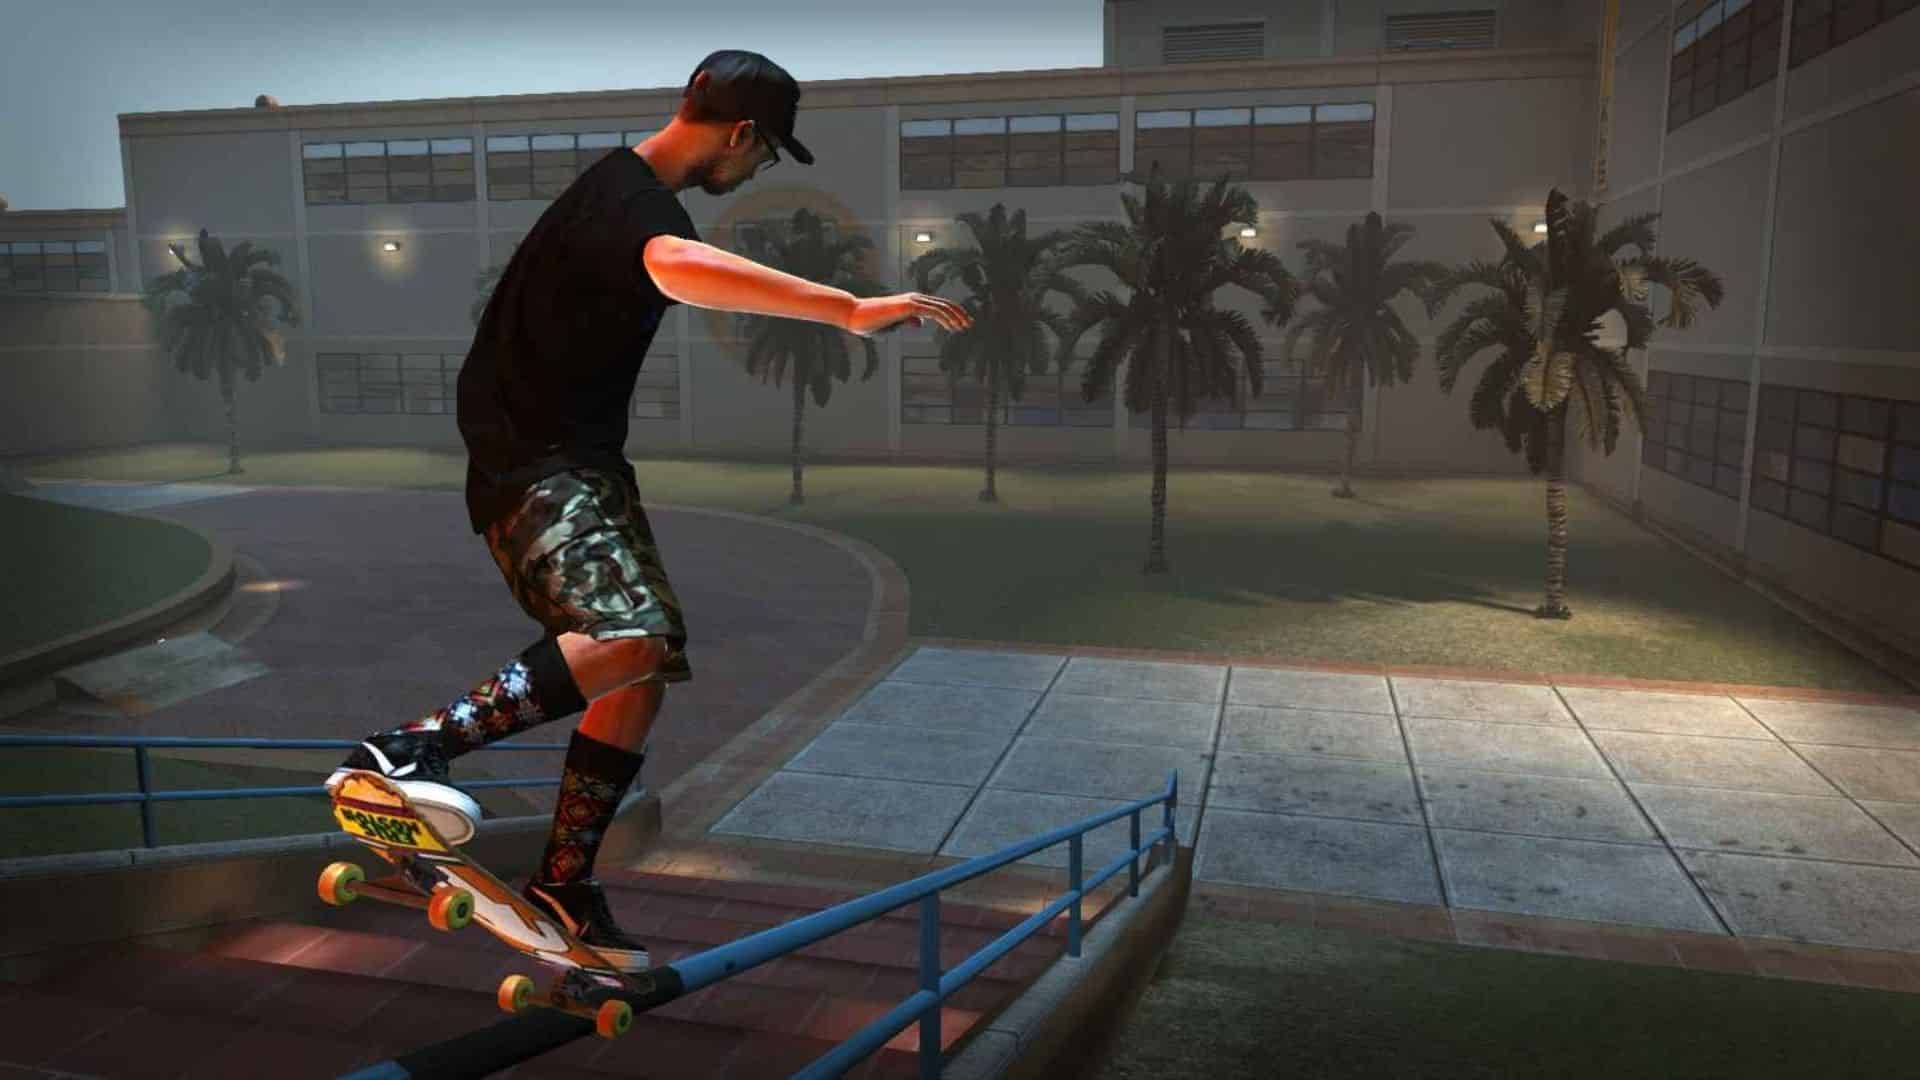 player grinding a rail in tony hawk's